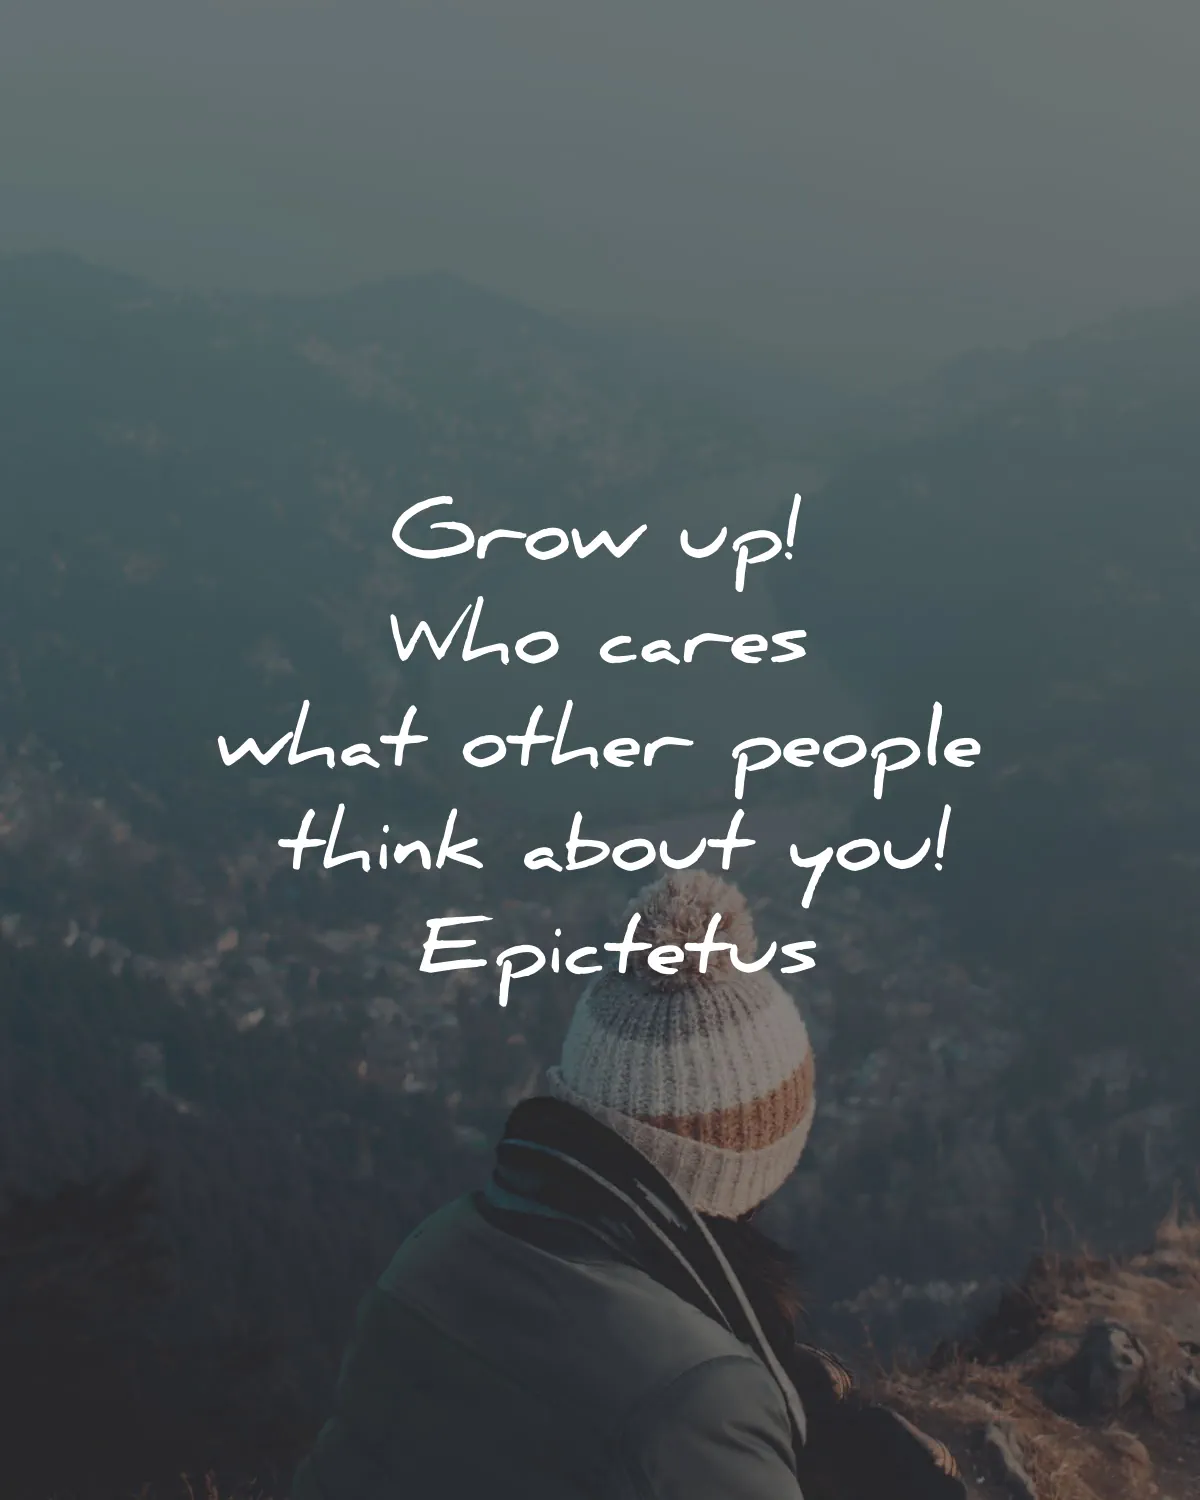 epictetus quotes grow up cares other people think wisdom